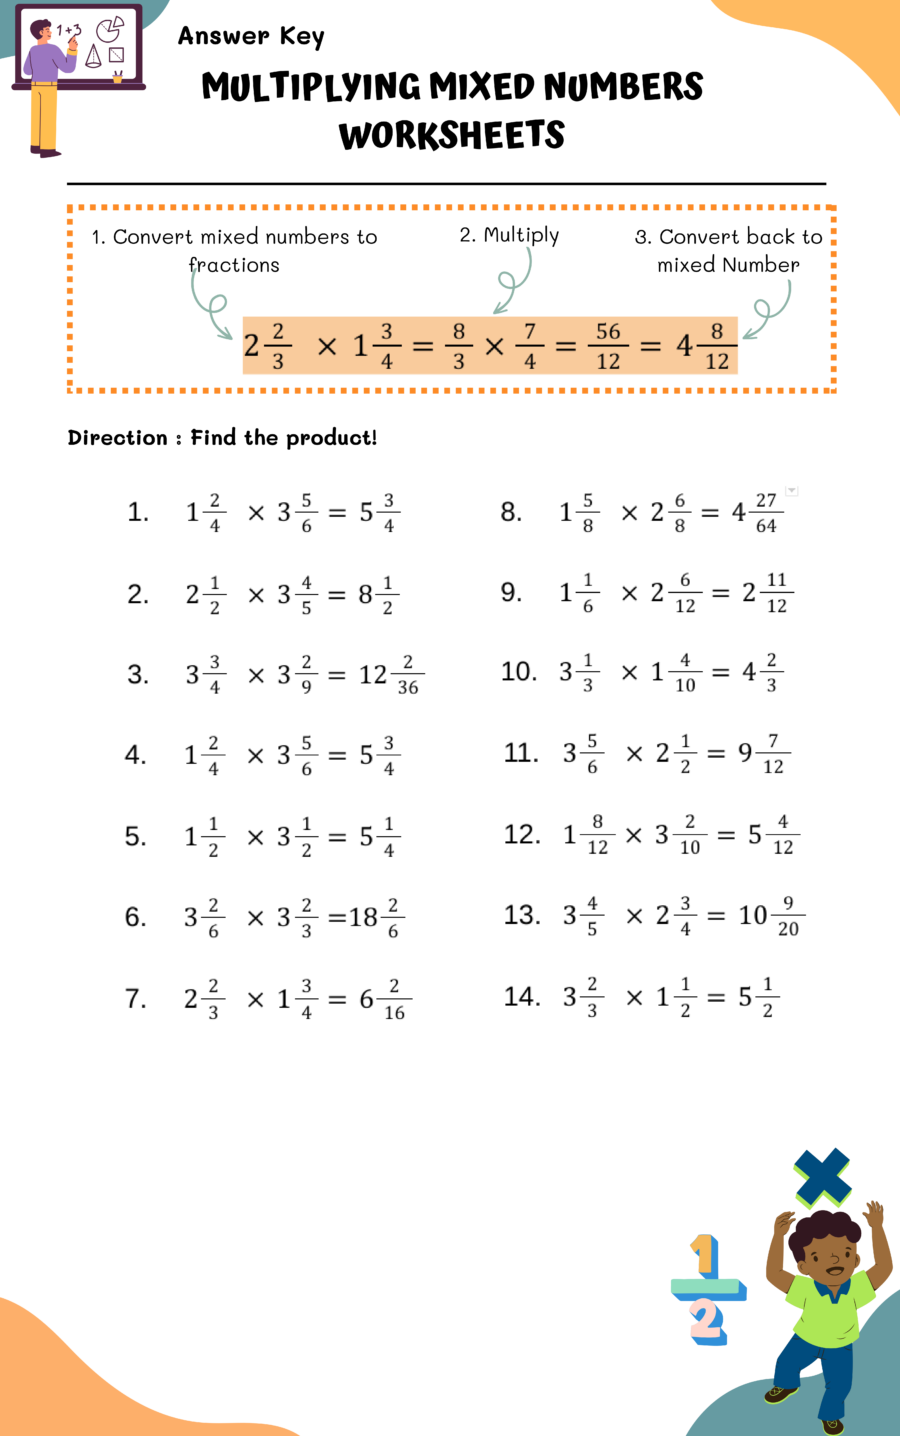 Multiplying Mixed Numbers Worksheet Answer Key